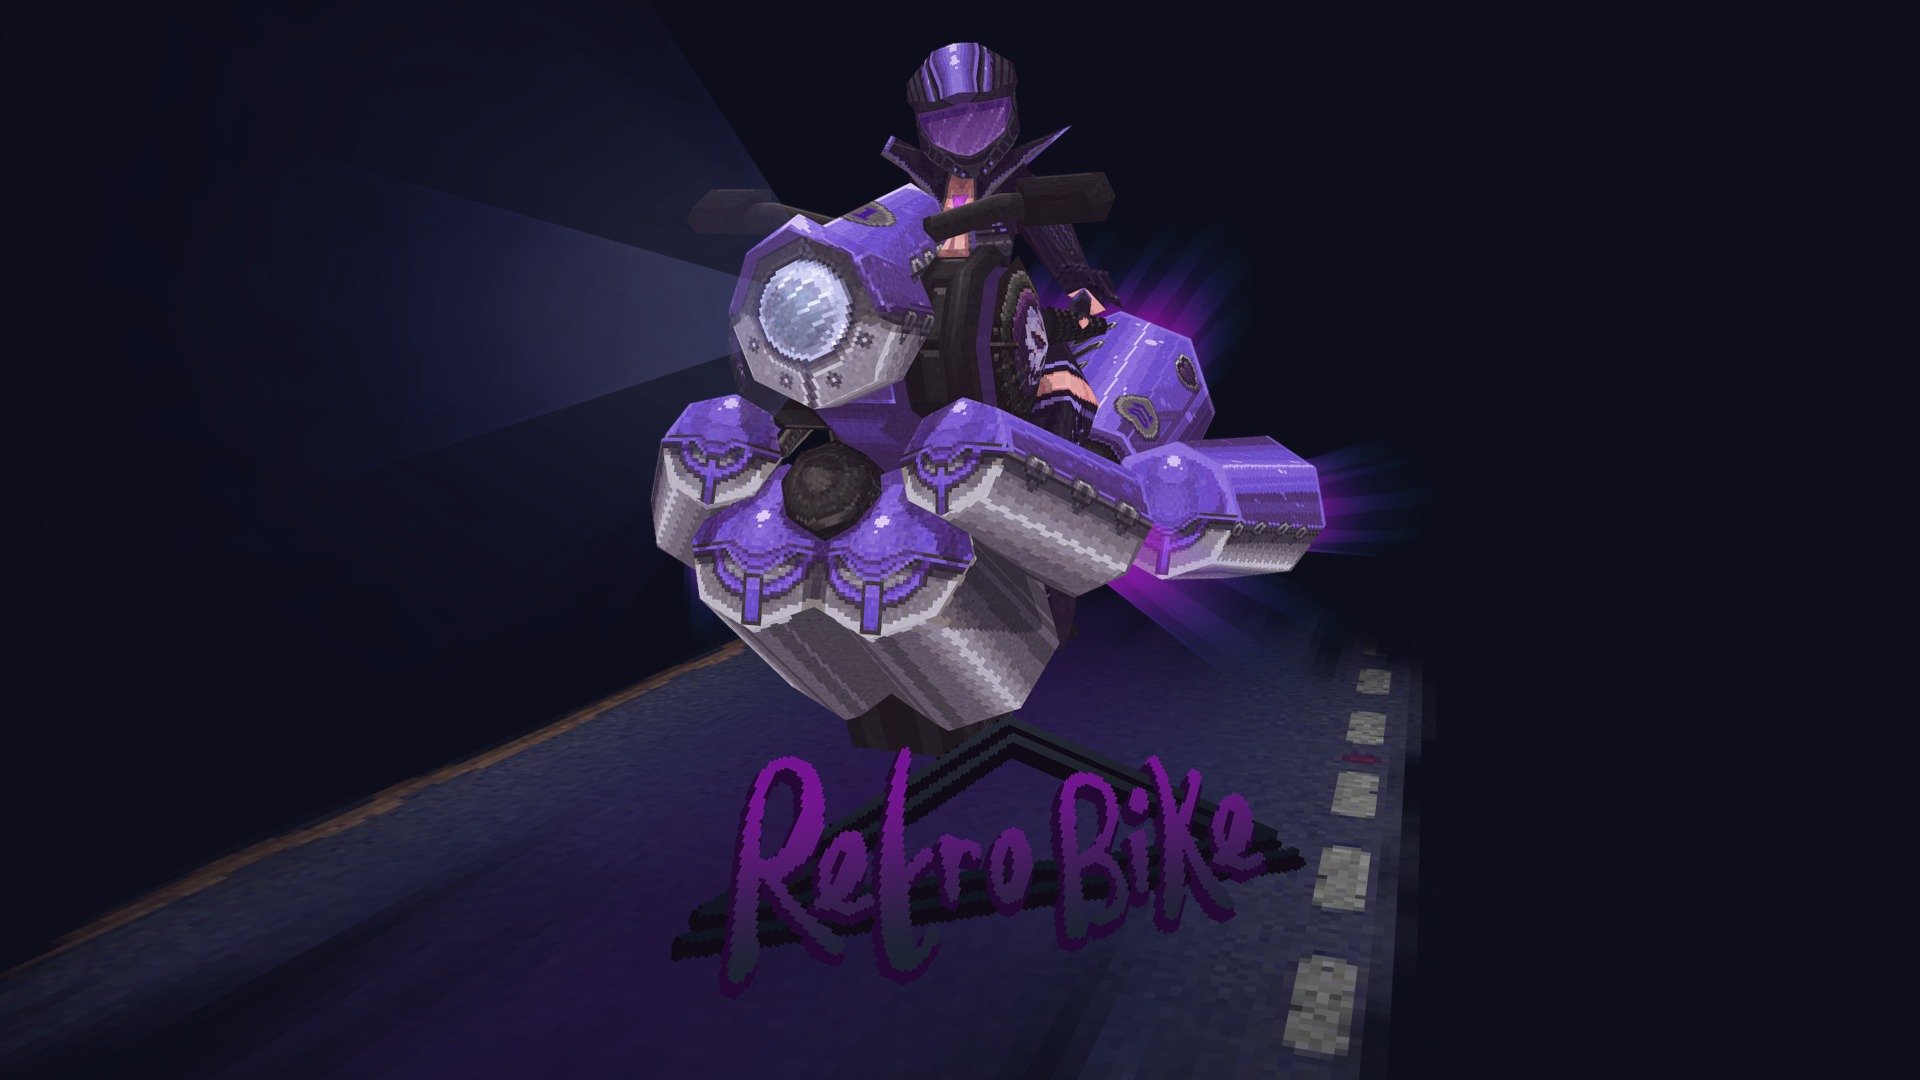 Retro Bike 
I made using Maya and hand painted the textures in Photoshop. I enjoyed making this as I just made it up as I went! 
I love pixel art! Let me know what you think!
I wanted to do something Pixel, retro and the character kind of just came as I was making the bike 3d model